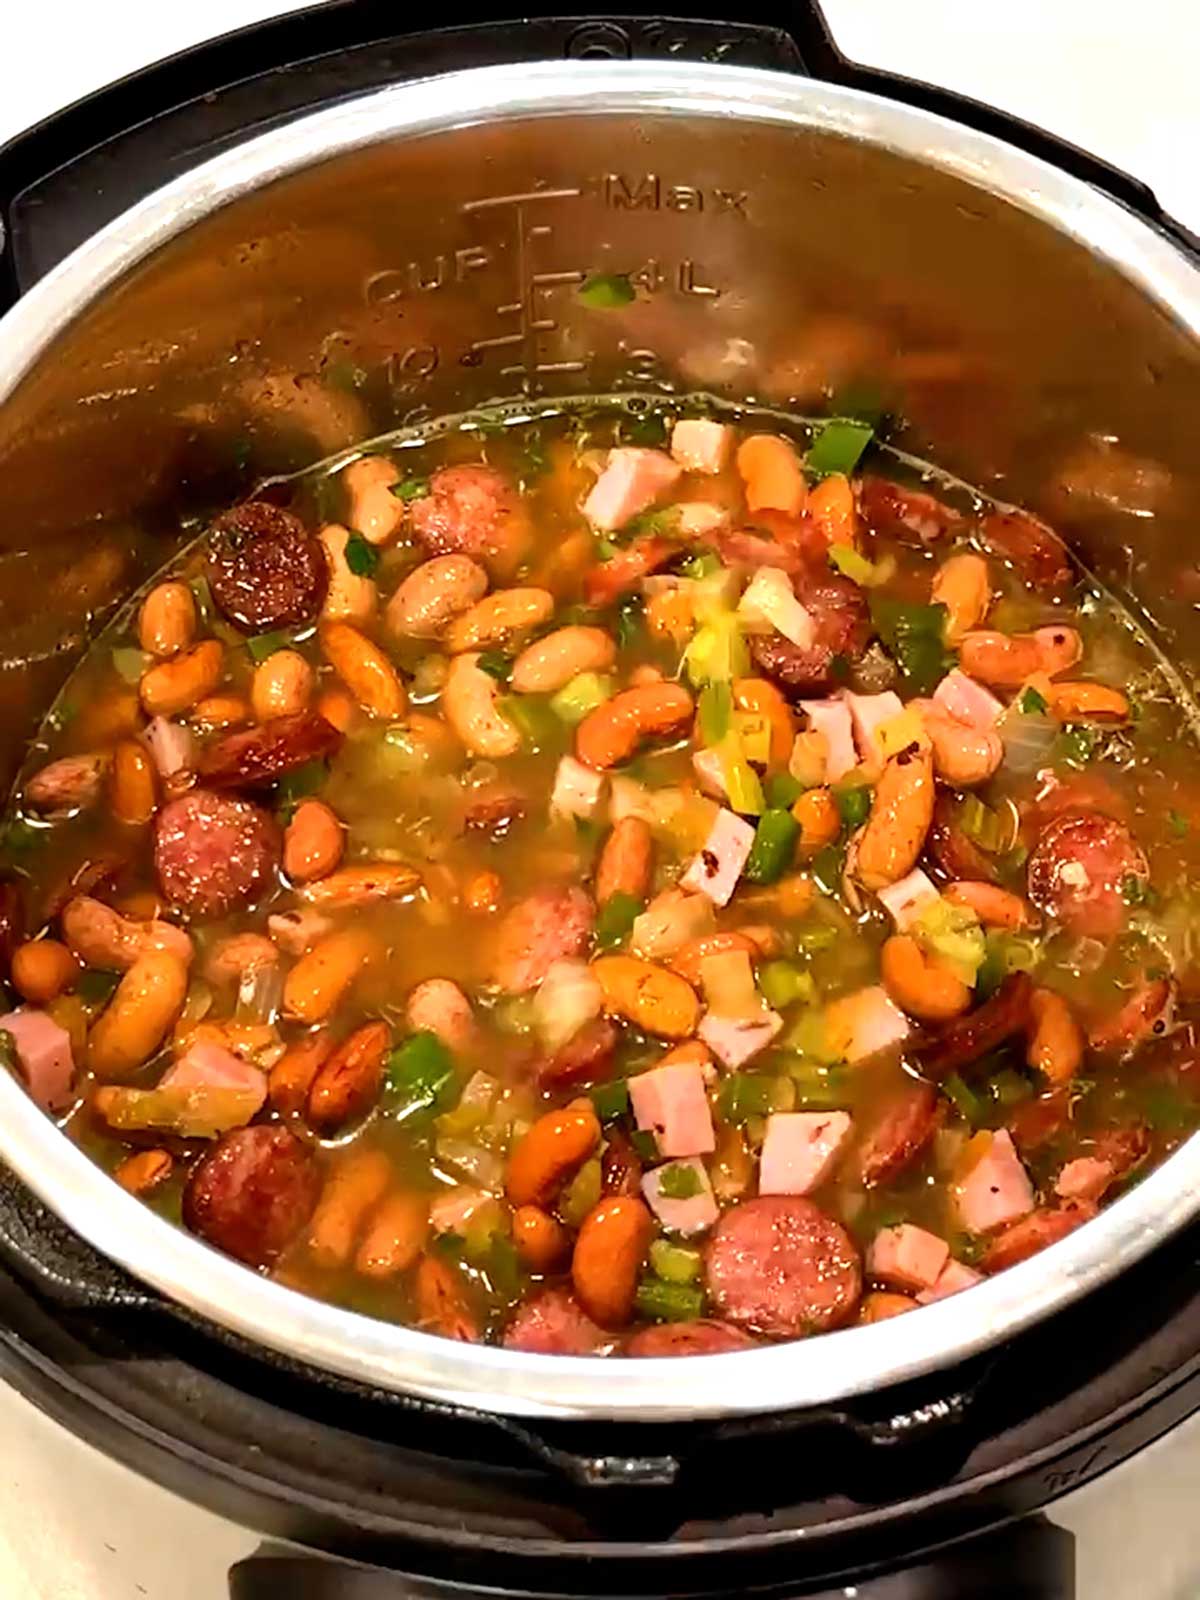 Drained kidney beans, water and cooked sausage stirred into mixture in Instant Pot.